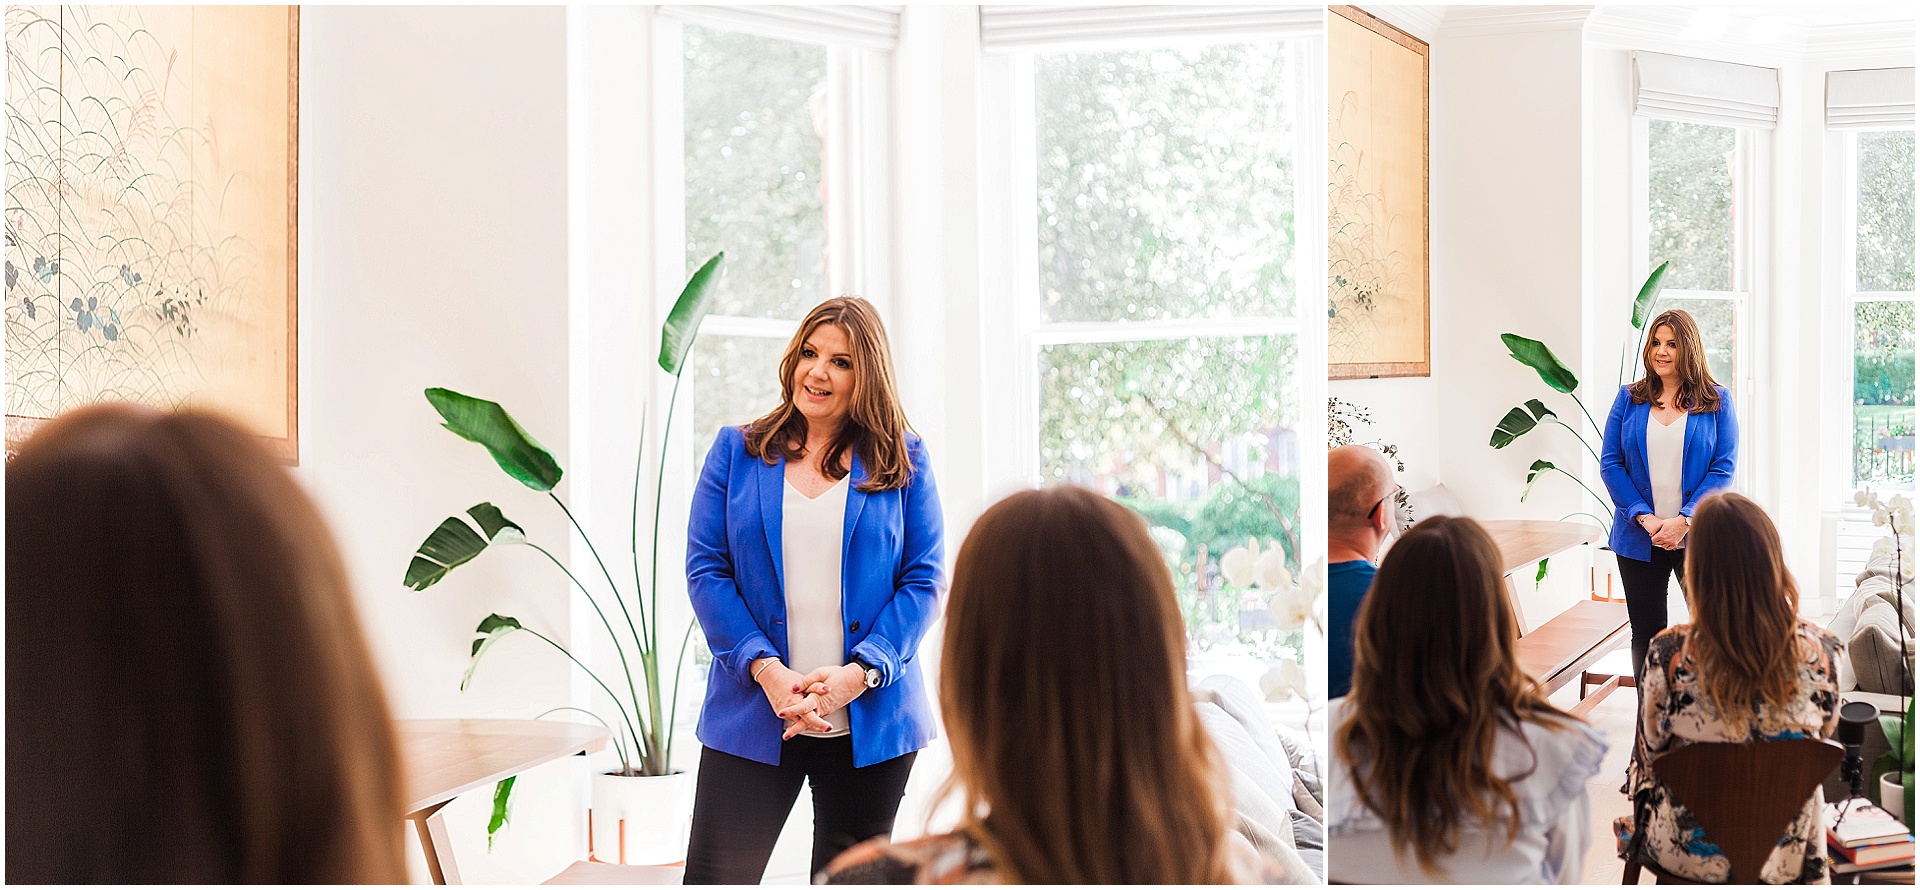 London brand shoot with strategist and campaigner Emma Clayton, images by London brand photographer AKP Branding Stories